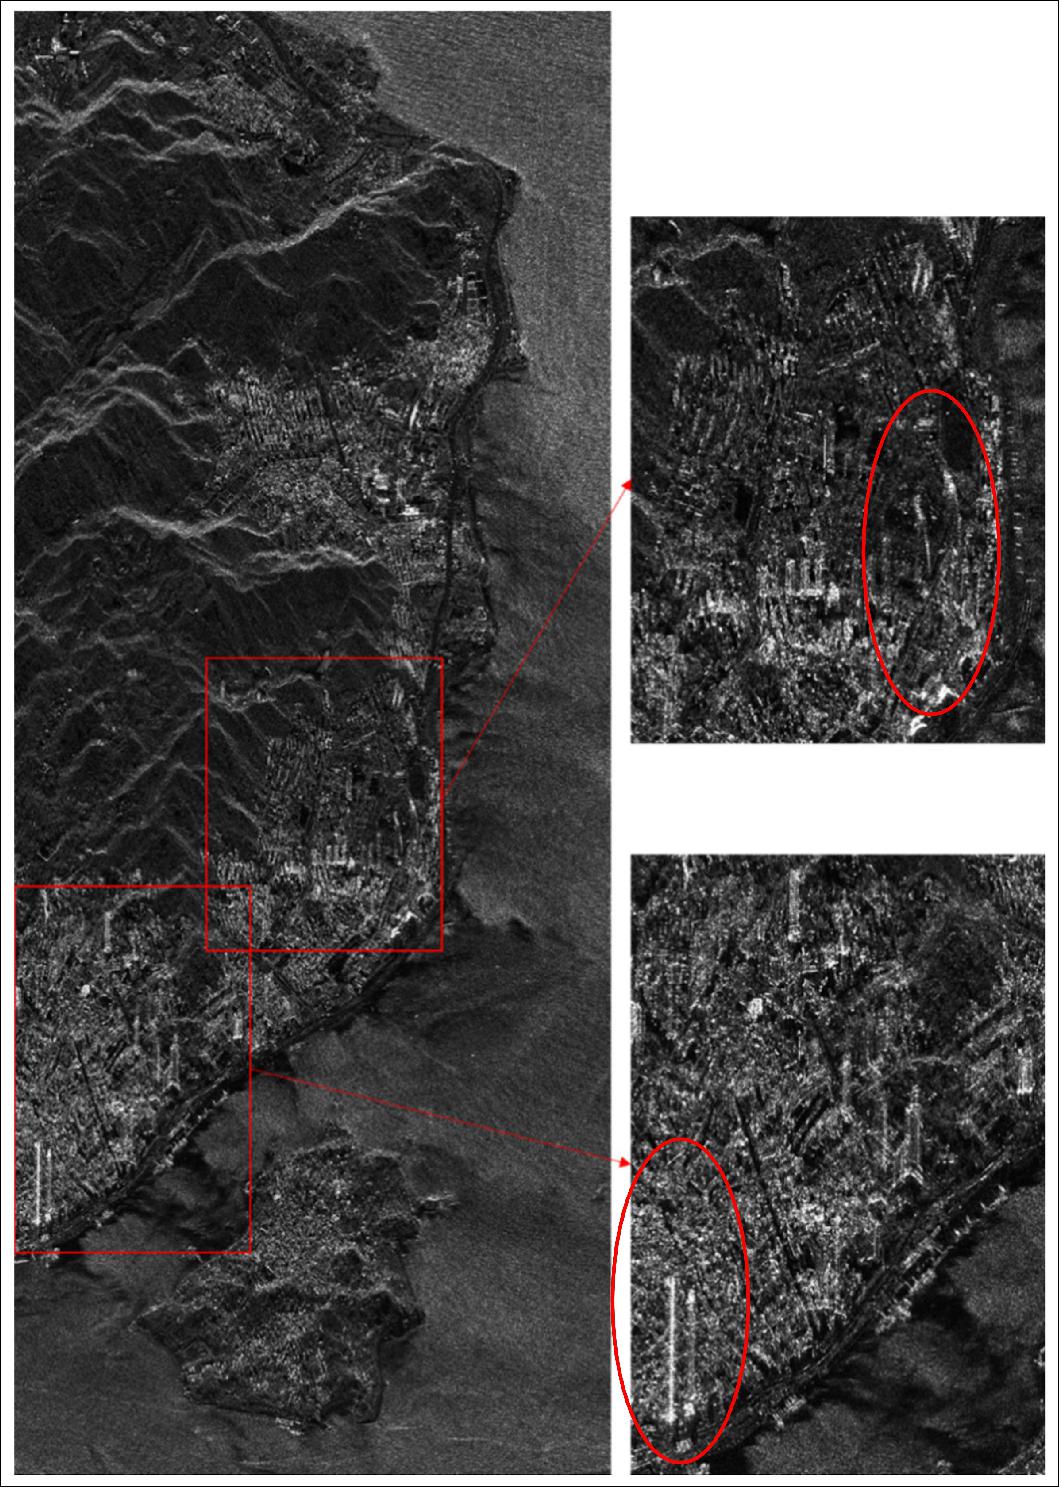 Figure 6: One-meter resolution spotlight-mode SAR image of Xiamen University Siming Campus, the gridding size is 1937 x 4750 (horizontal x vertical). The left red rectangle border indicates the high-rise area, which shows some 3D features of buildings. The right red rectangle indicates the main part of the campus. The oval borders indicate the high rises’ location (image credit: Xiamen University, University of Delaware)